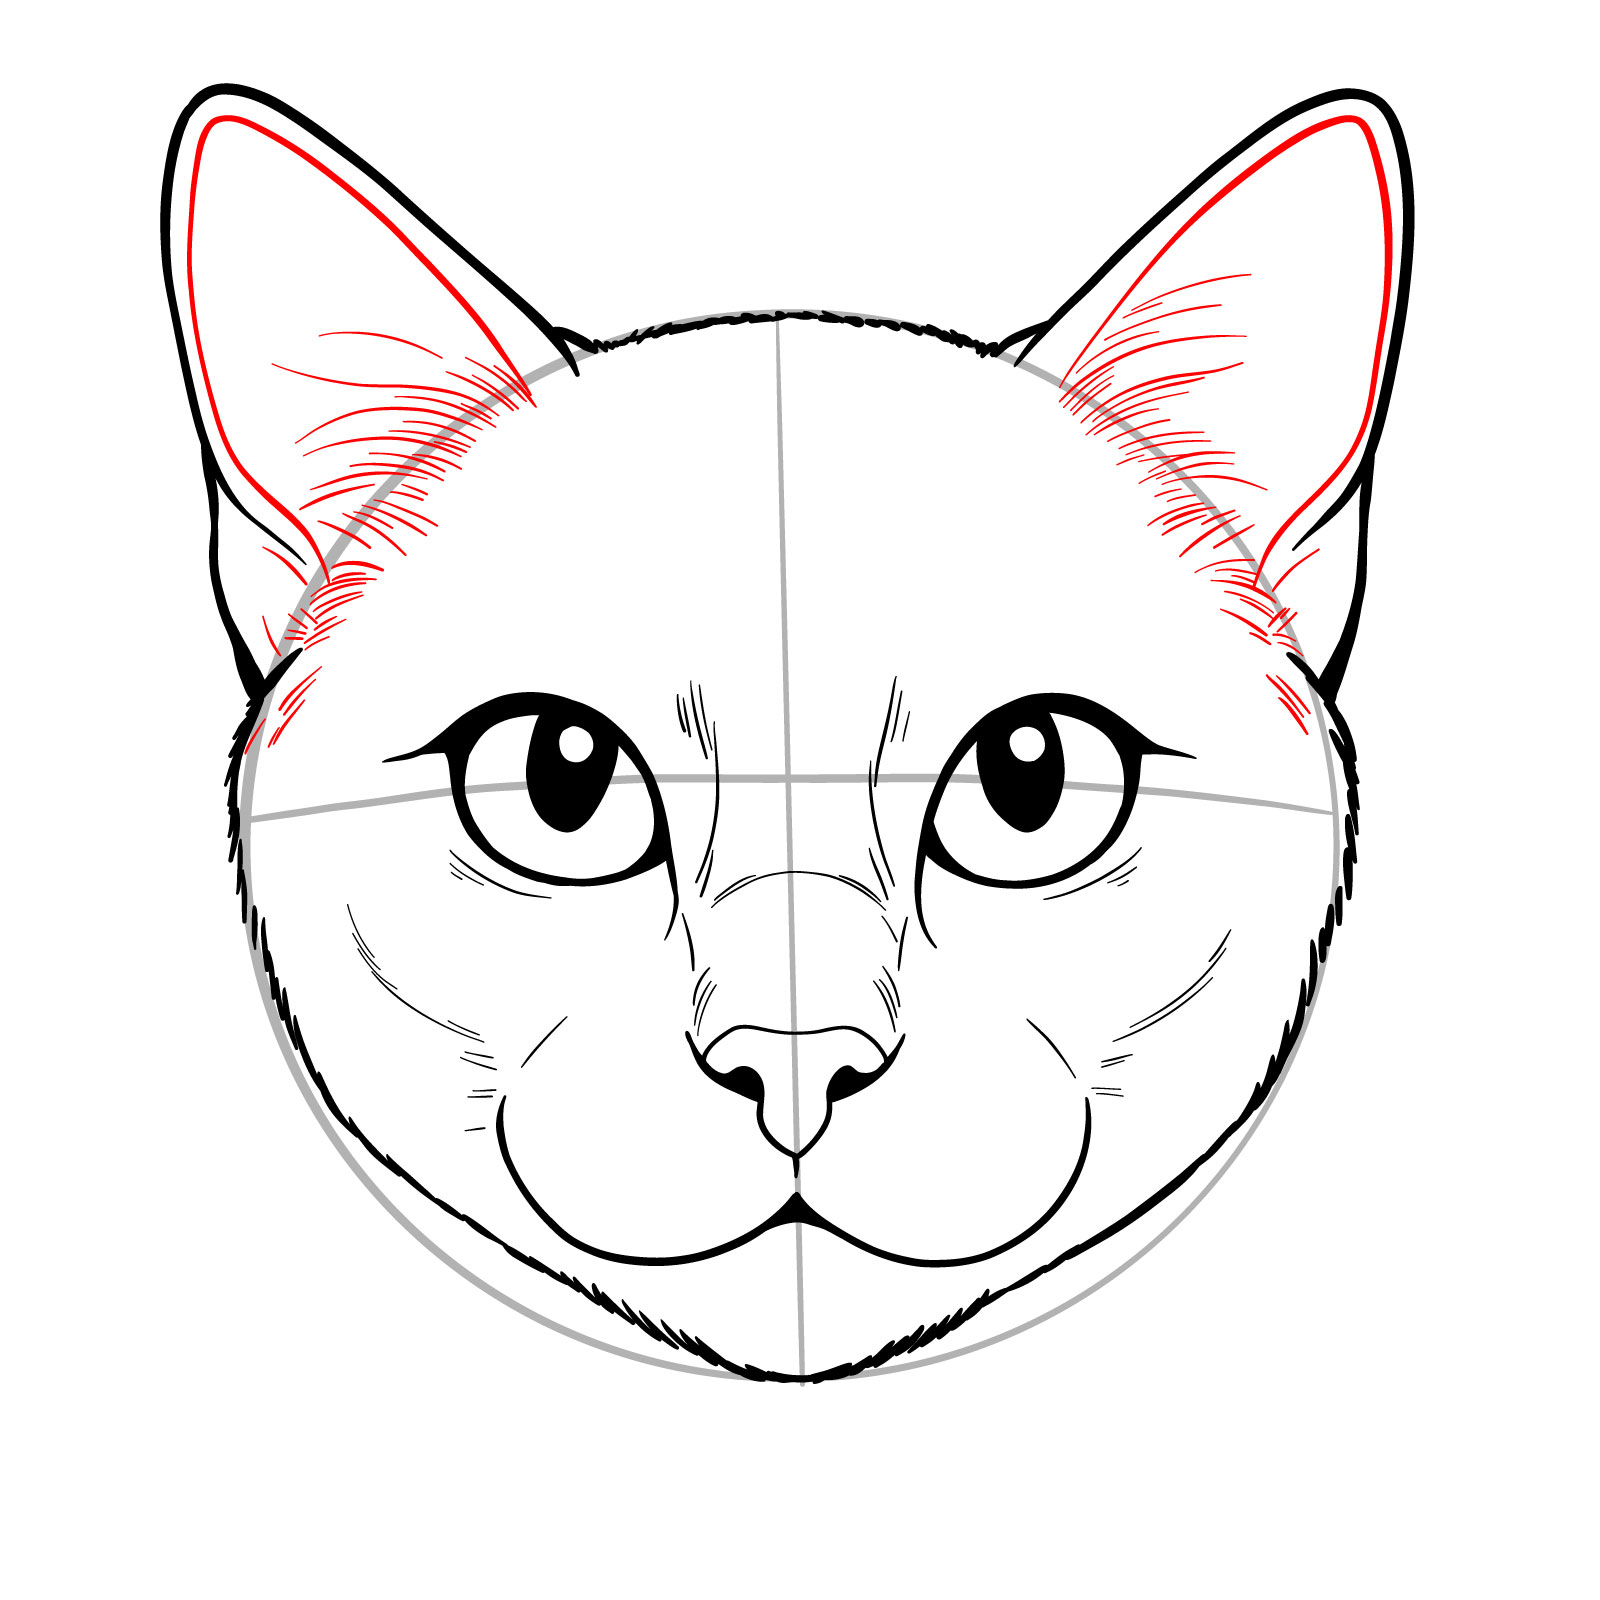 Detailed sketch of the inner ear lines and fur texture in a cat's face - step 08